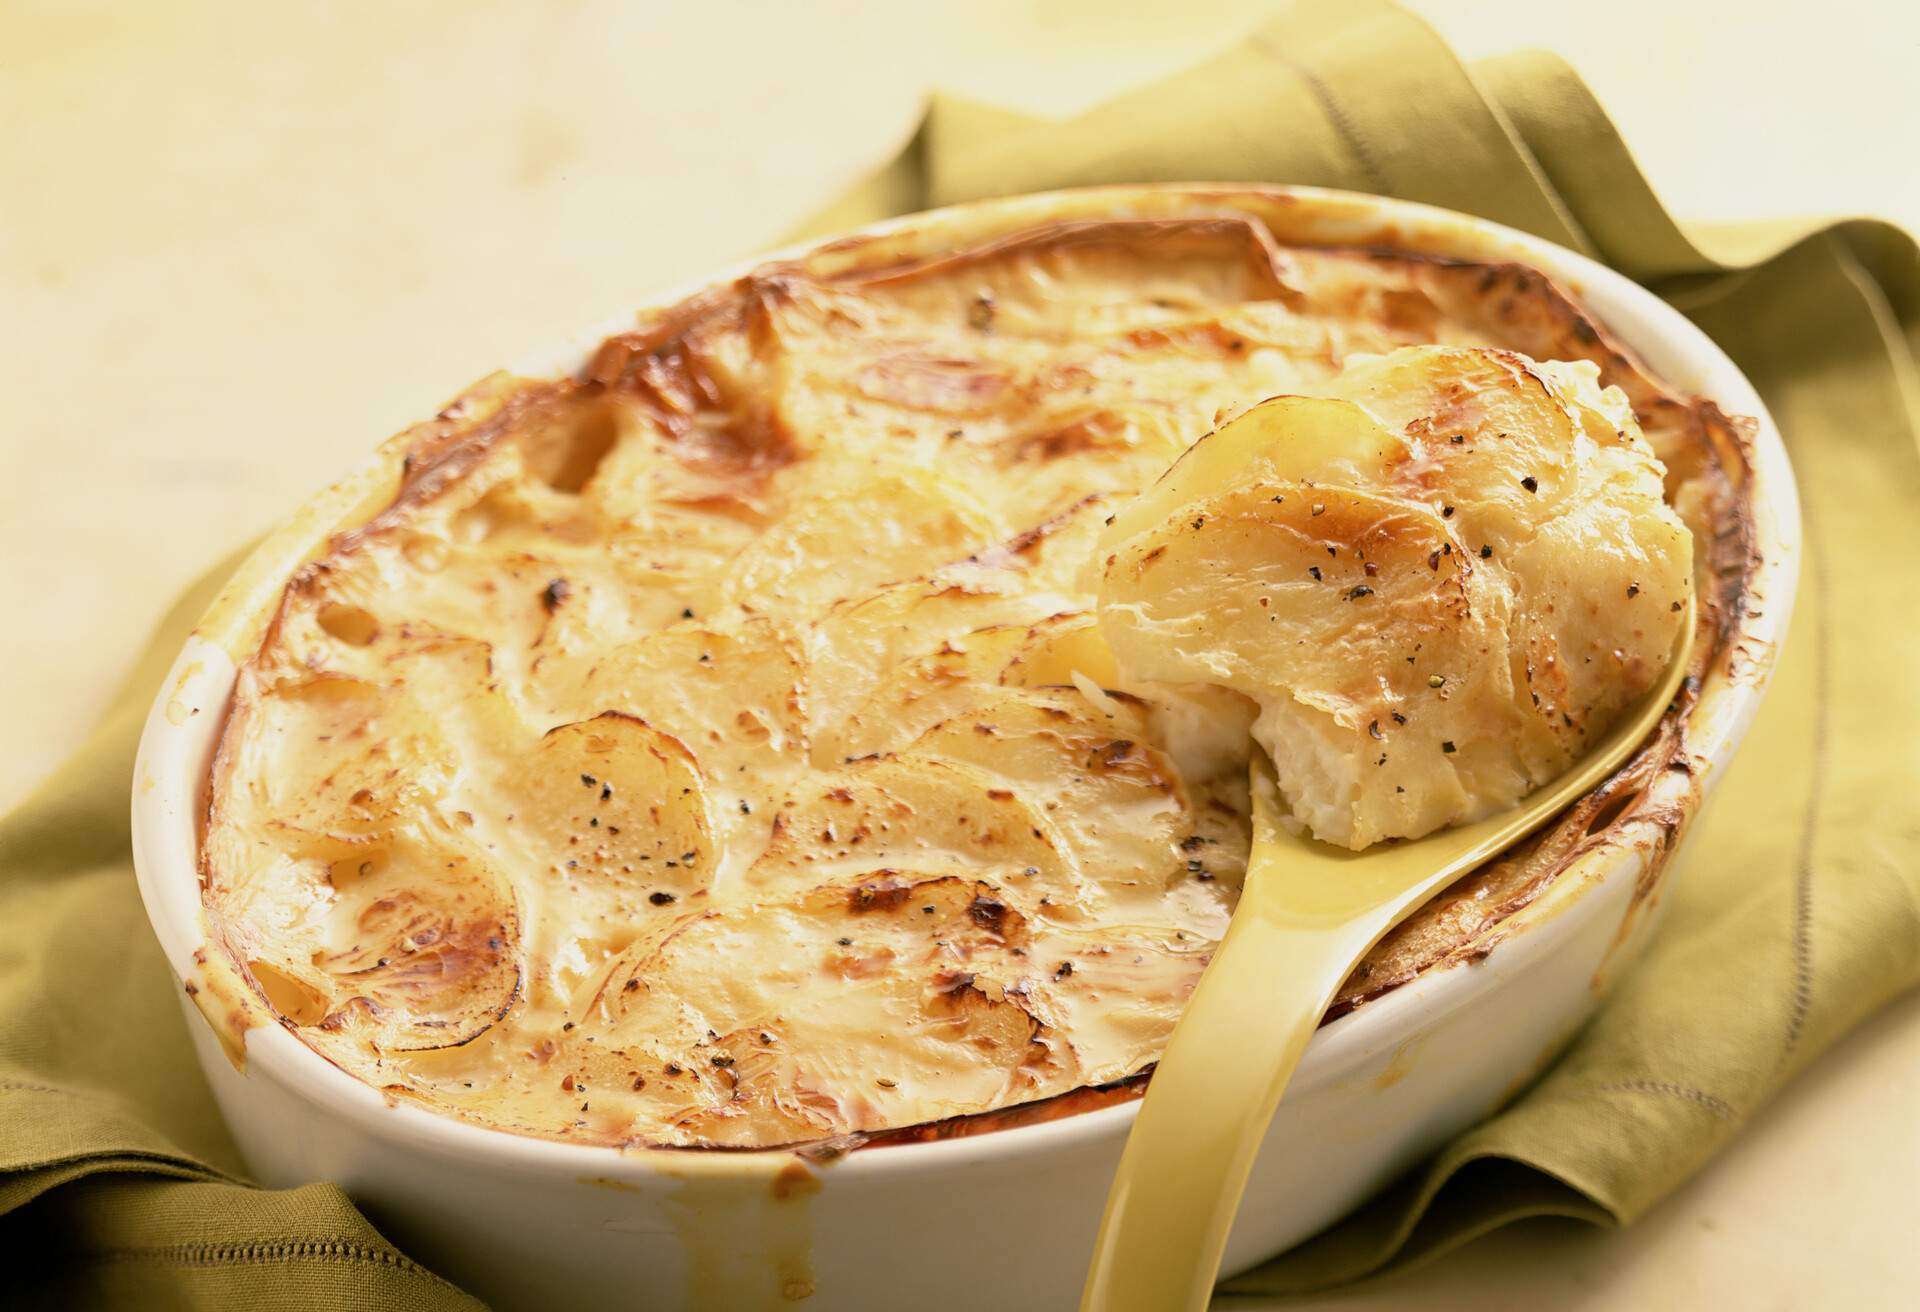 THEME_FOOD_FRENCH_Dauphinoise Potatoes_GettyImages-86056255